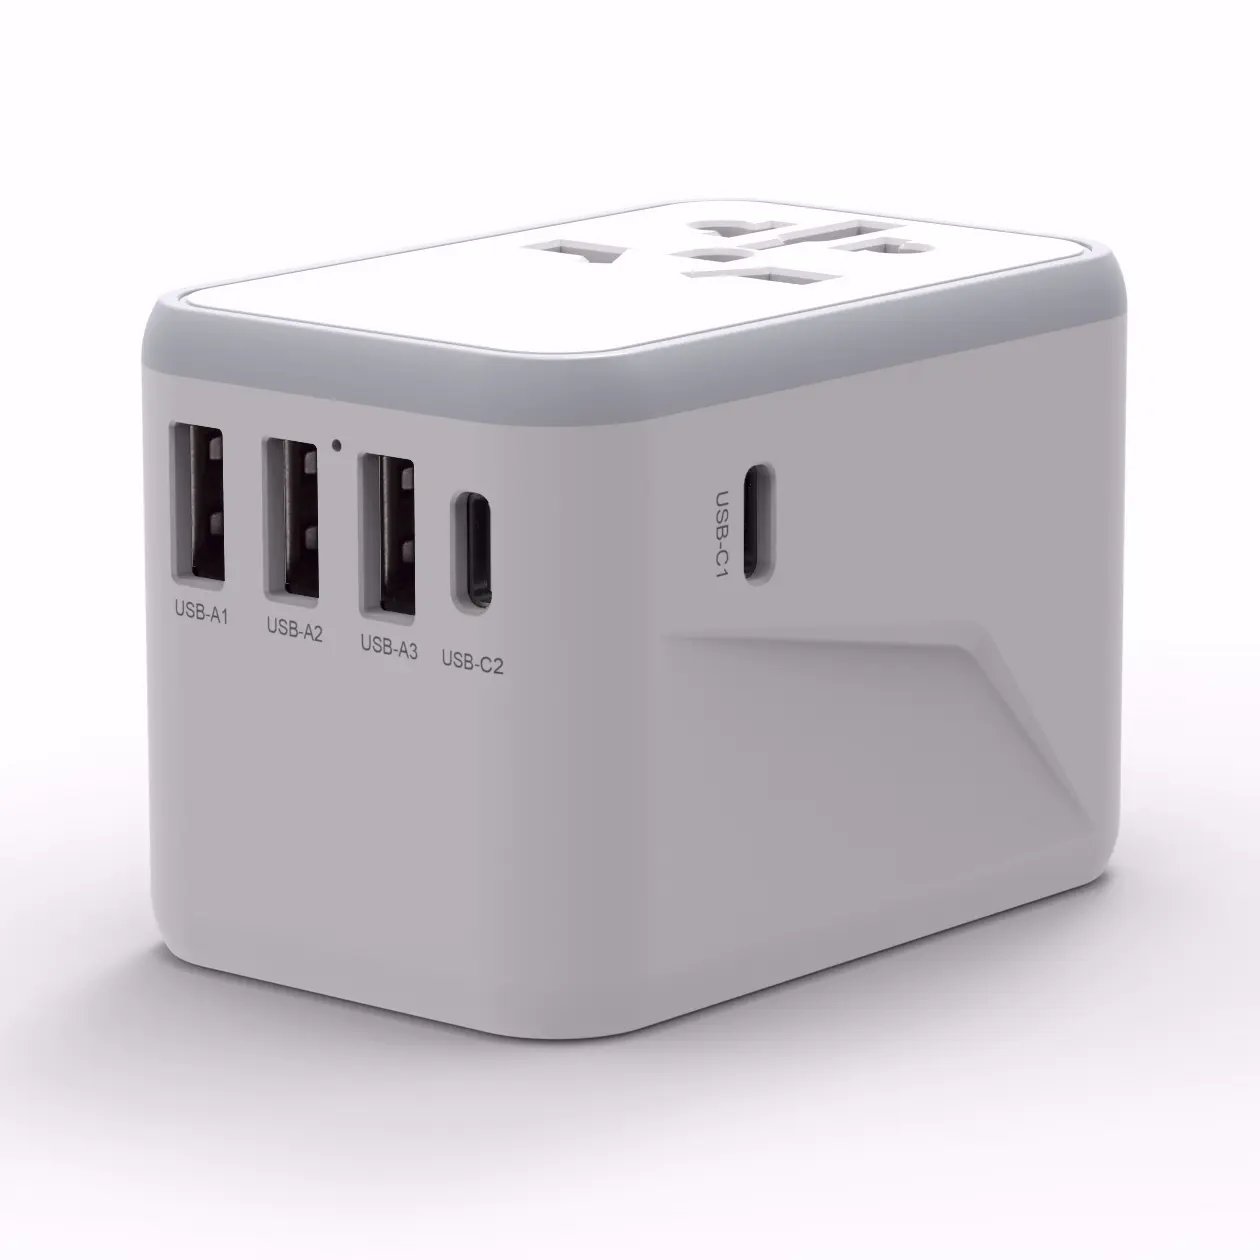 IEC60884 CE ROHS FCC universal adaptor OEM ODM charger usb wall socket plug travel adapter with PD 45watts